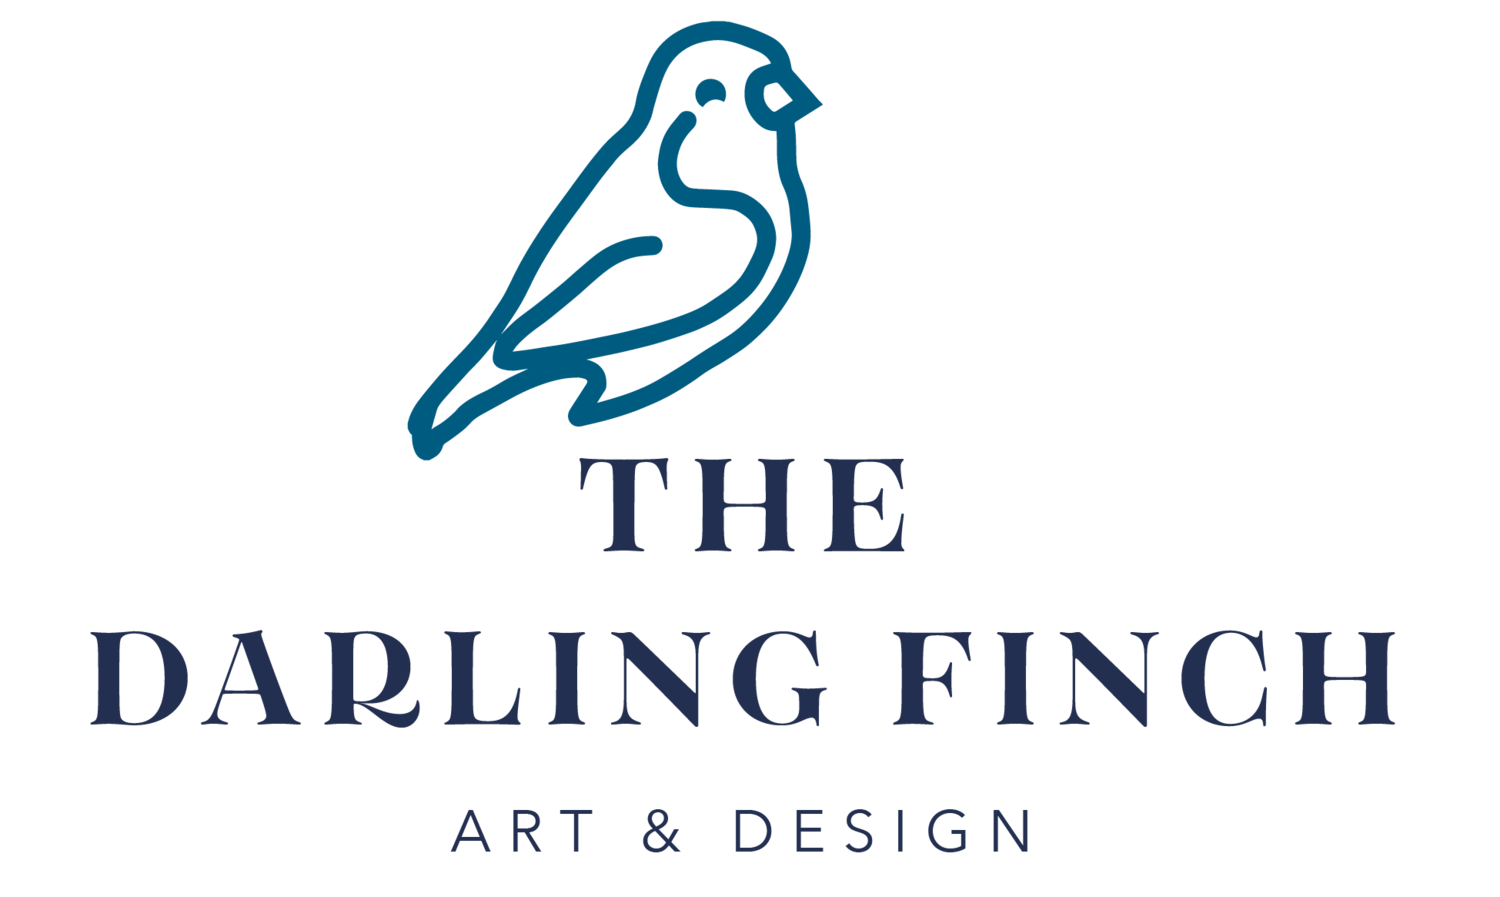 The Darling Finch